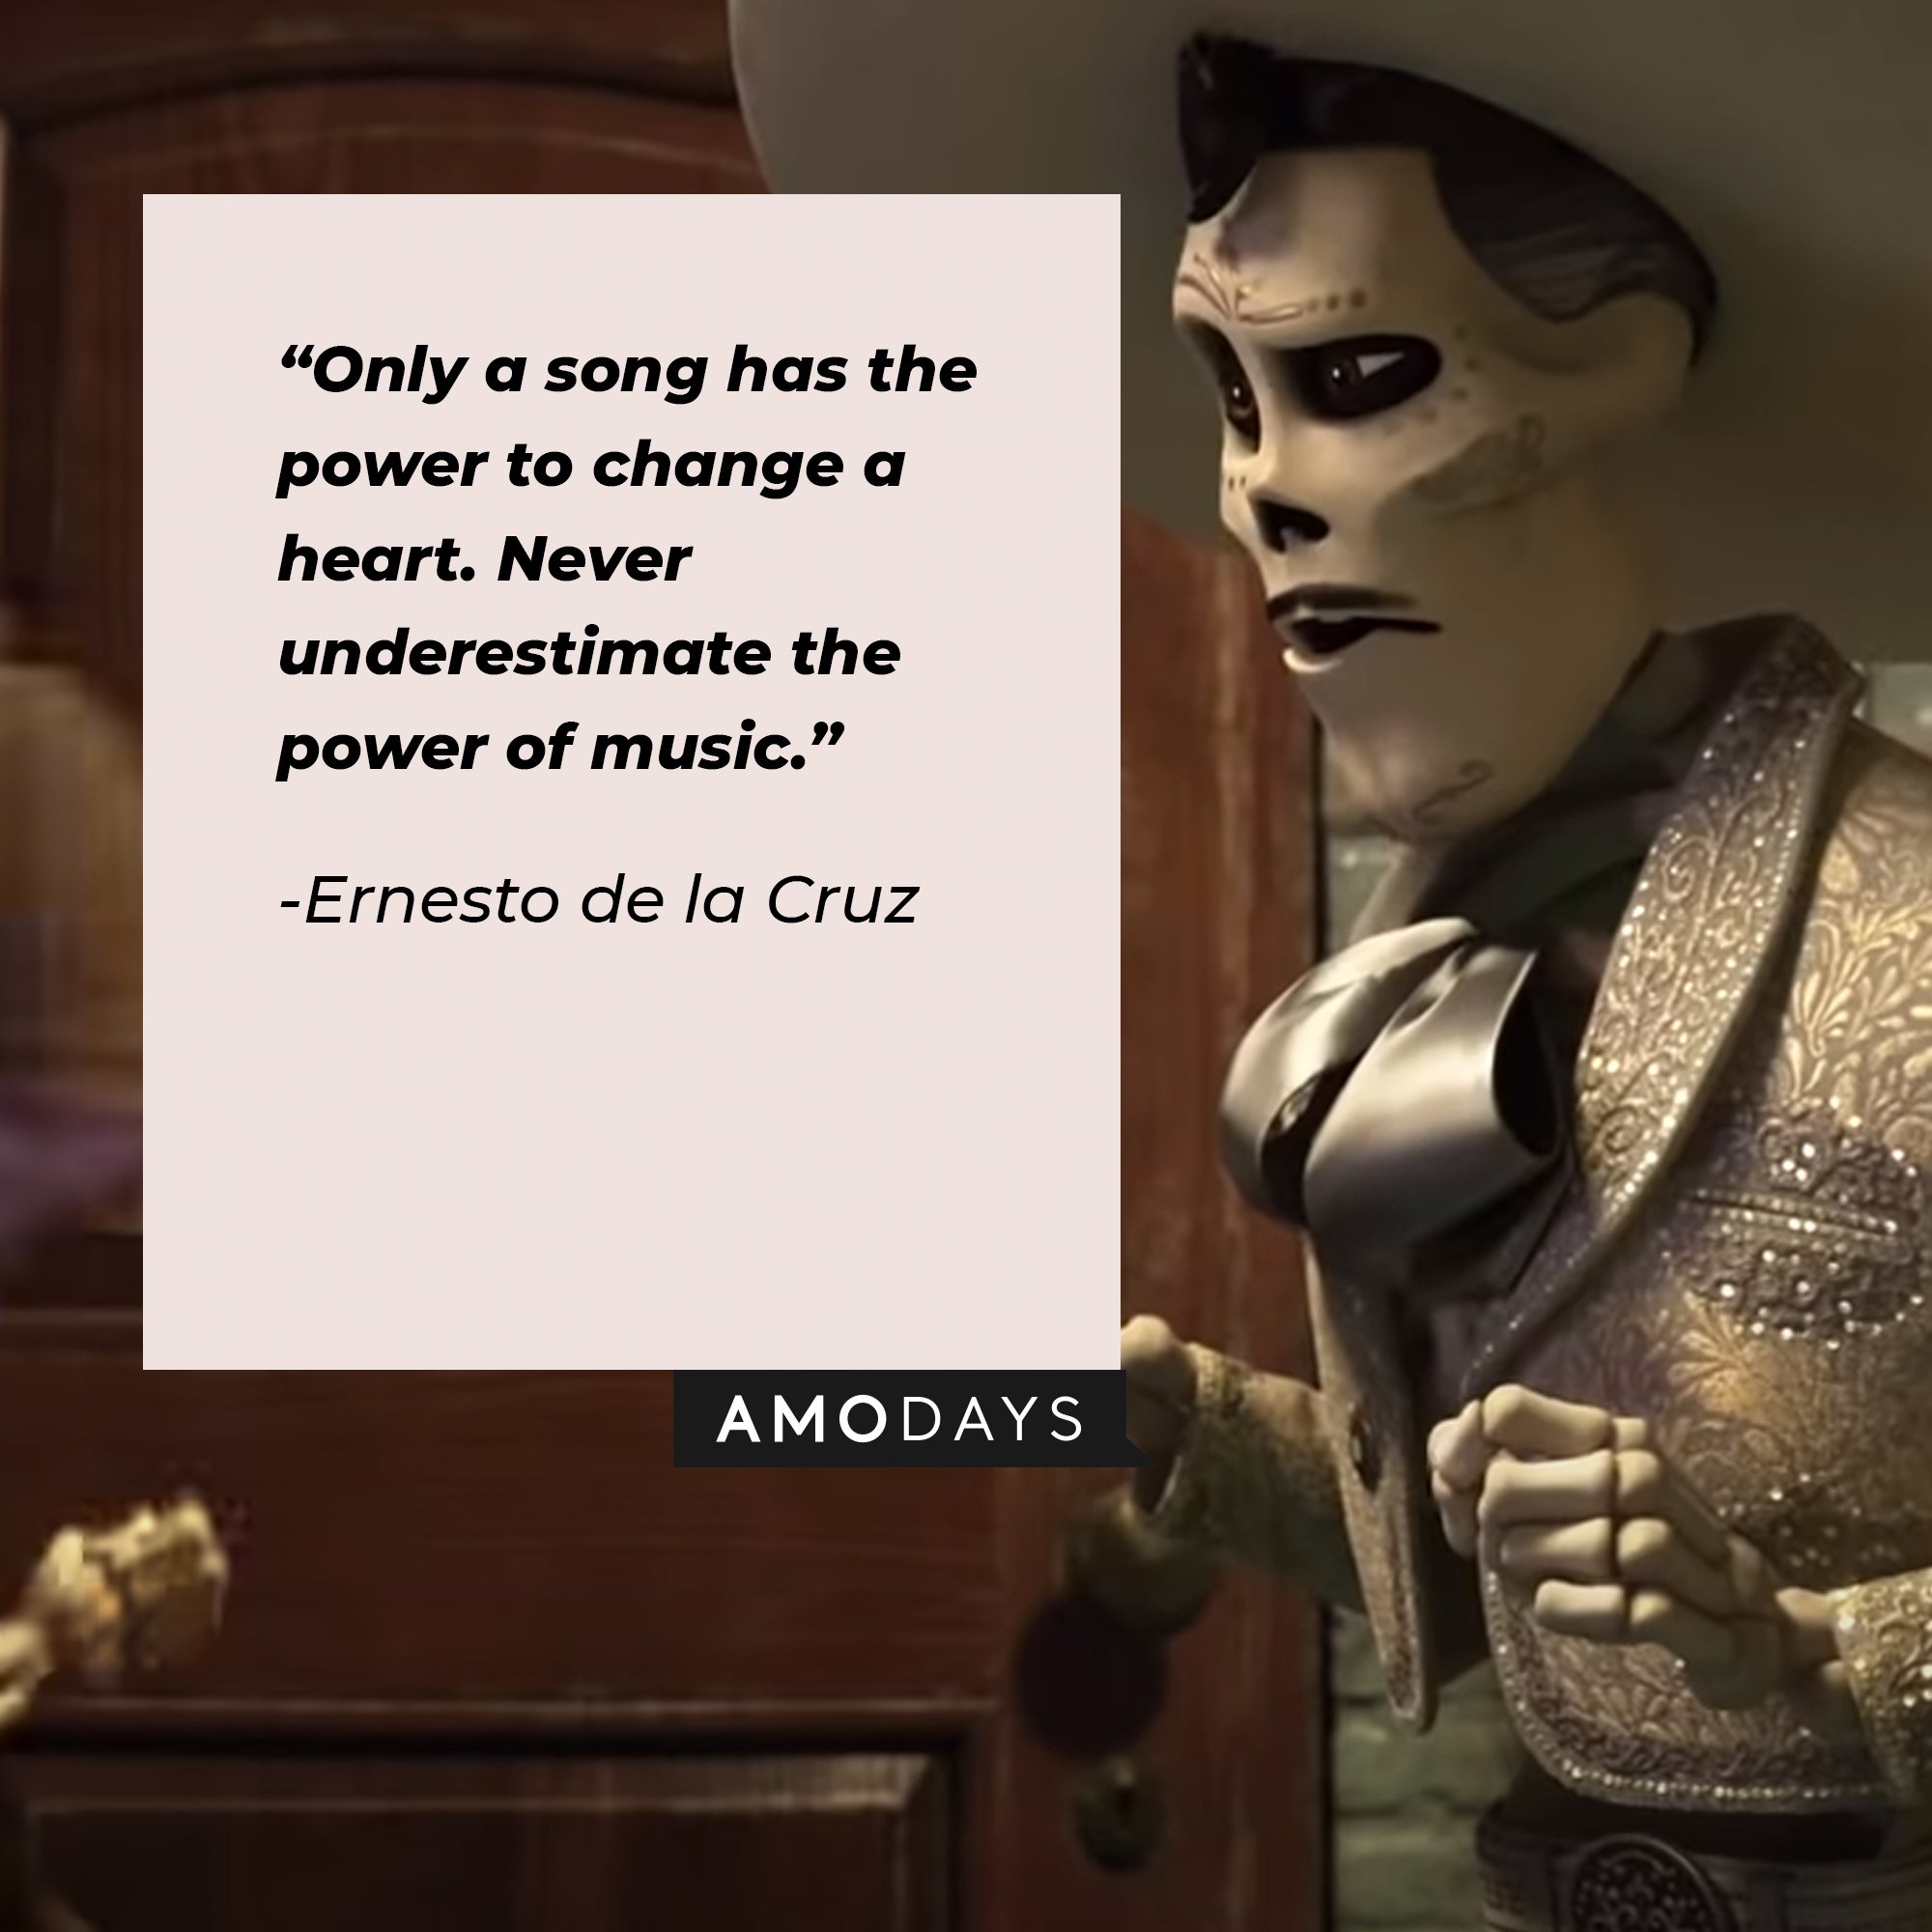  Ernesto de la Cruz's quote: “Only a song has the power to change a heart. Never underestimate the power of music.” | Image: AmoDays